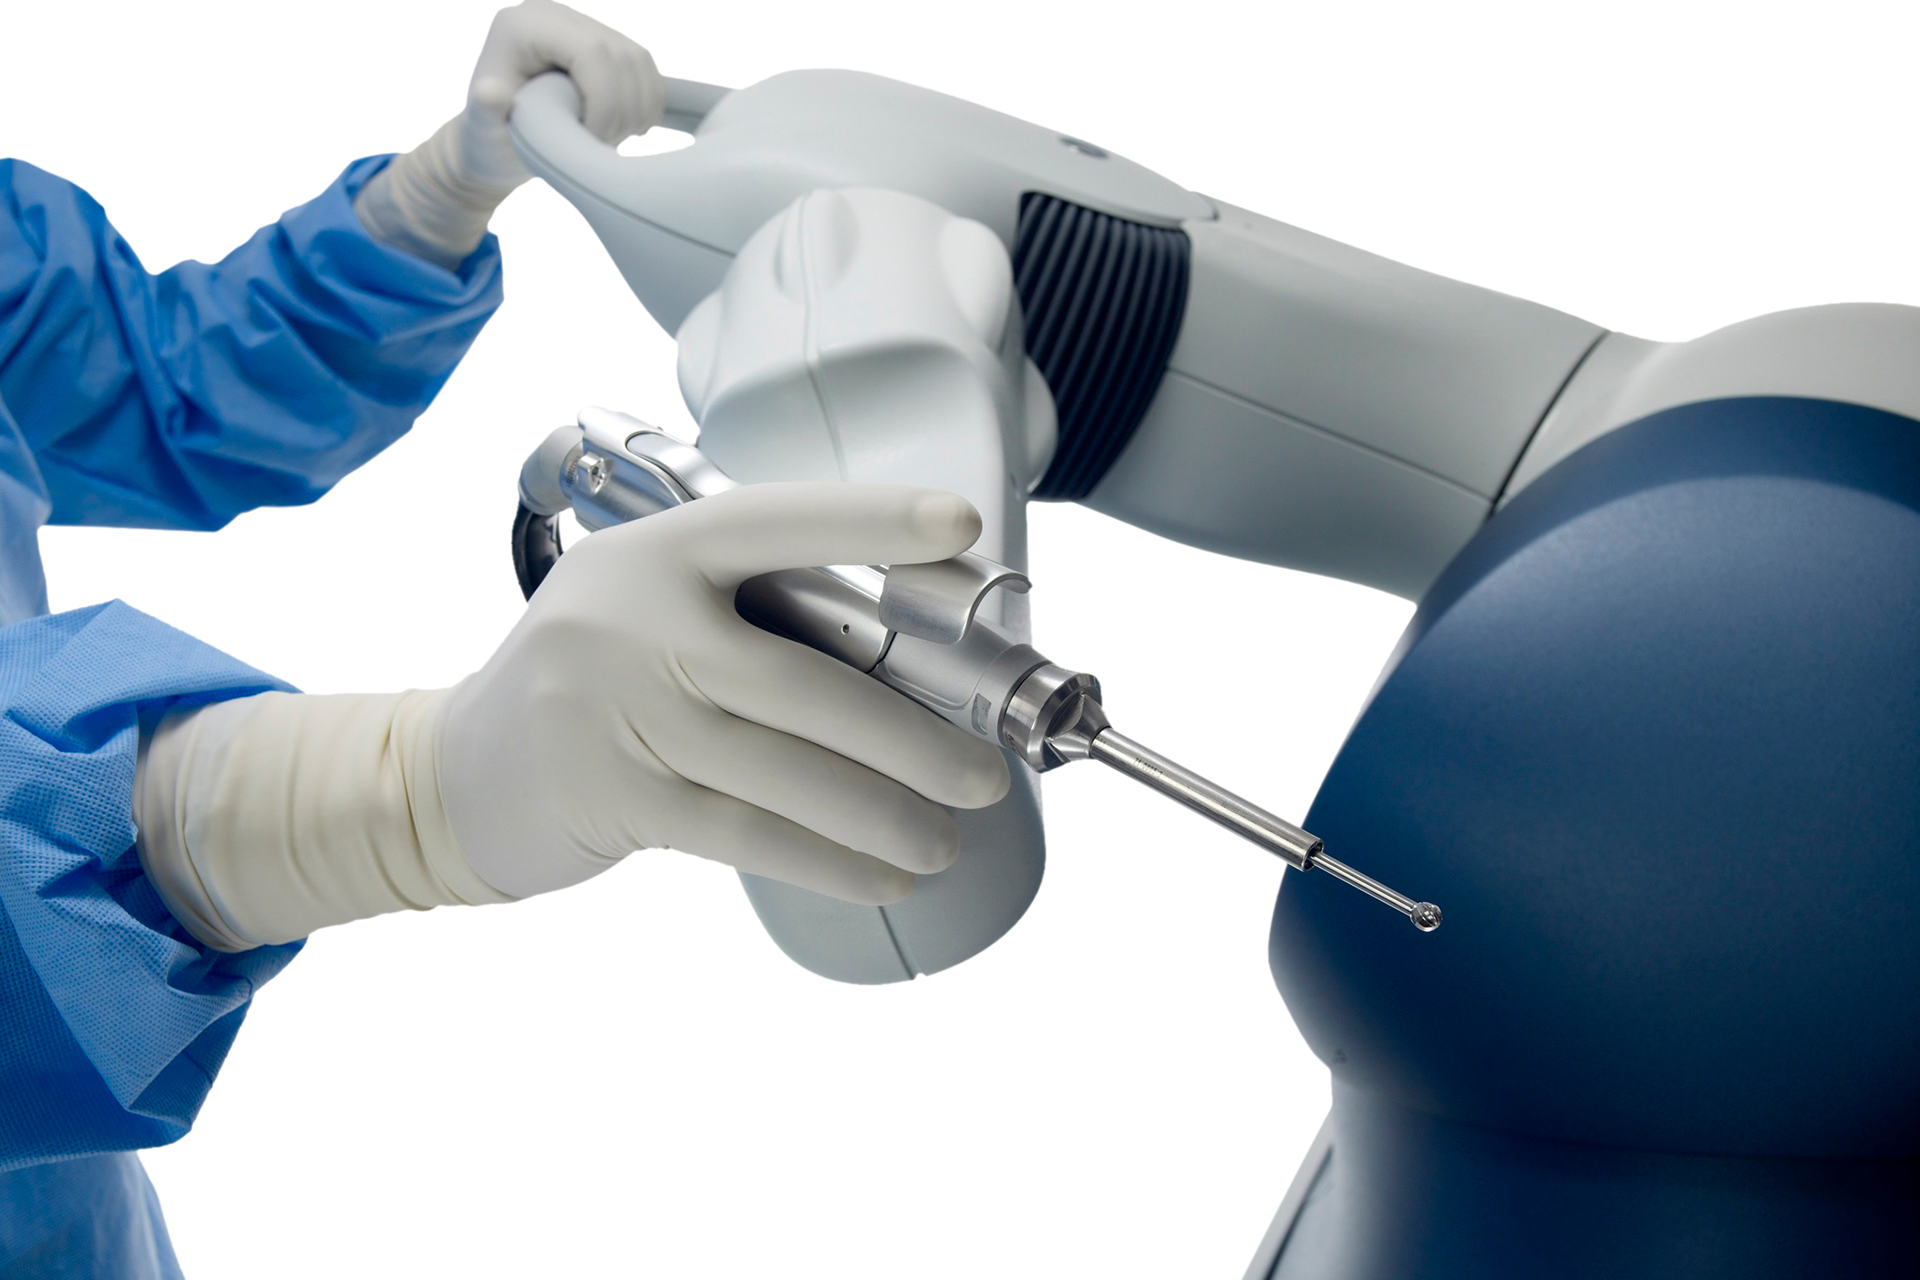 Stryker Mako robotic arm will improve joint replacement surgery -  yourOrthoMD